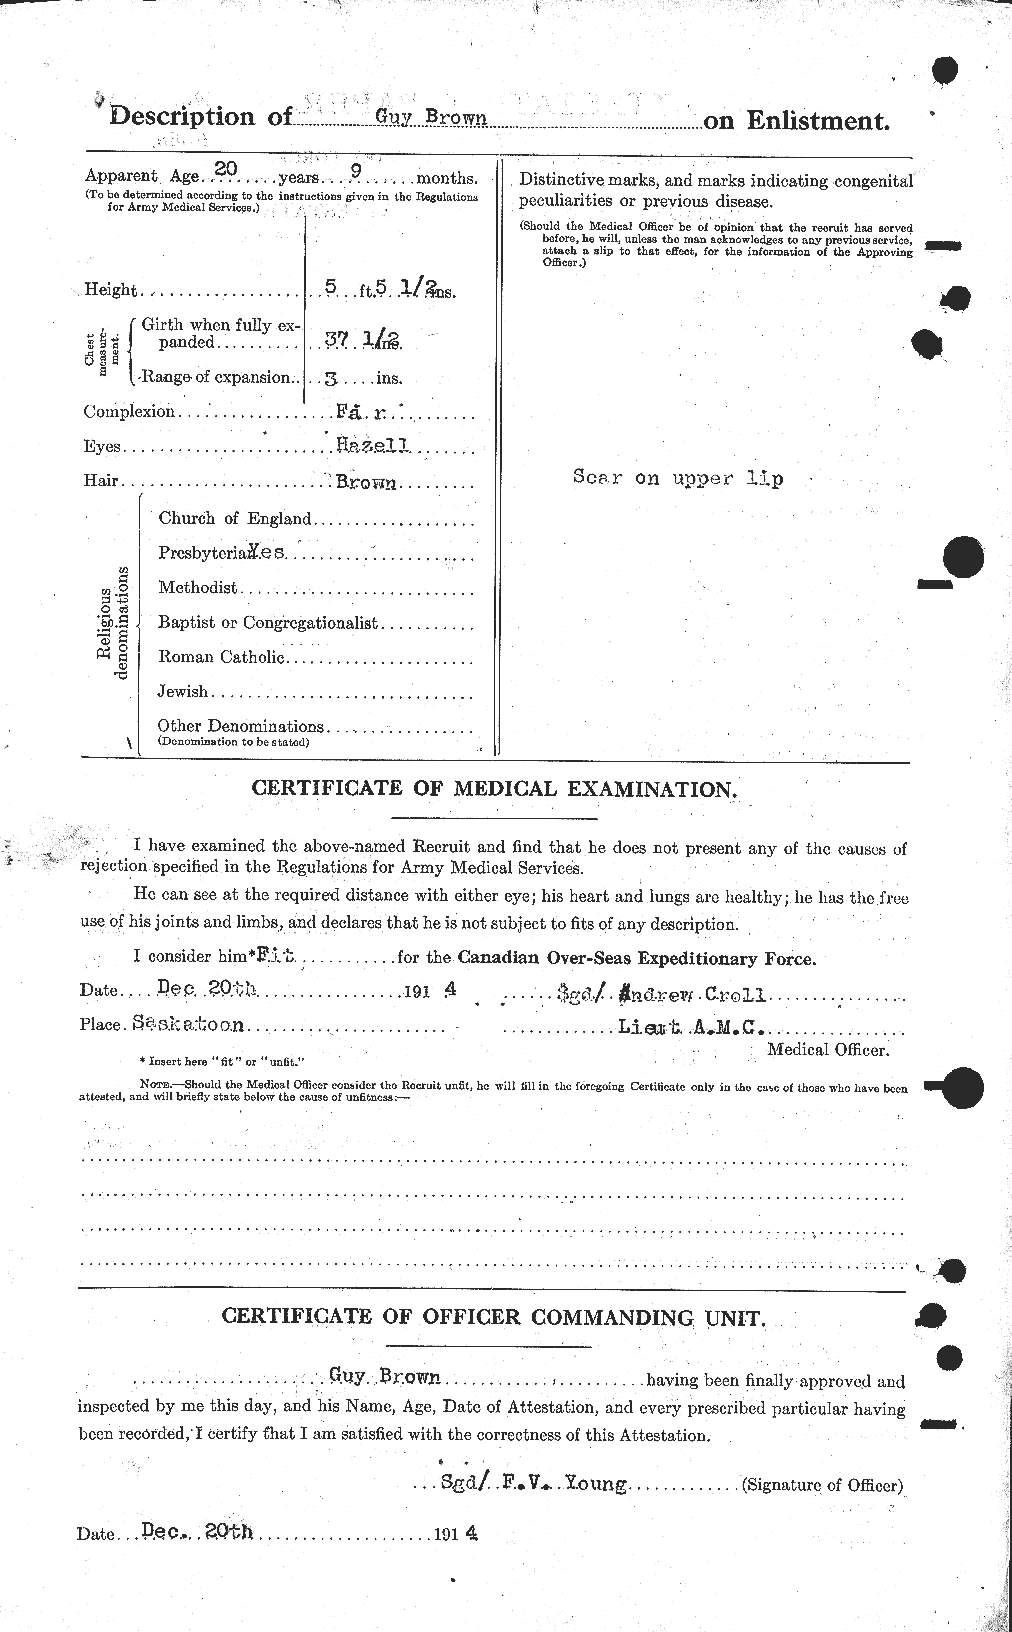 Personnel Records of the First World War - CEF 262652b